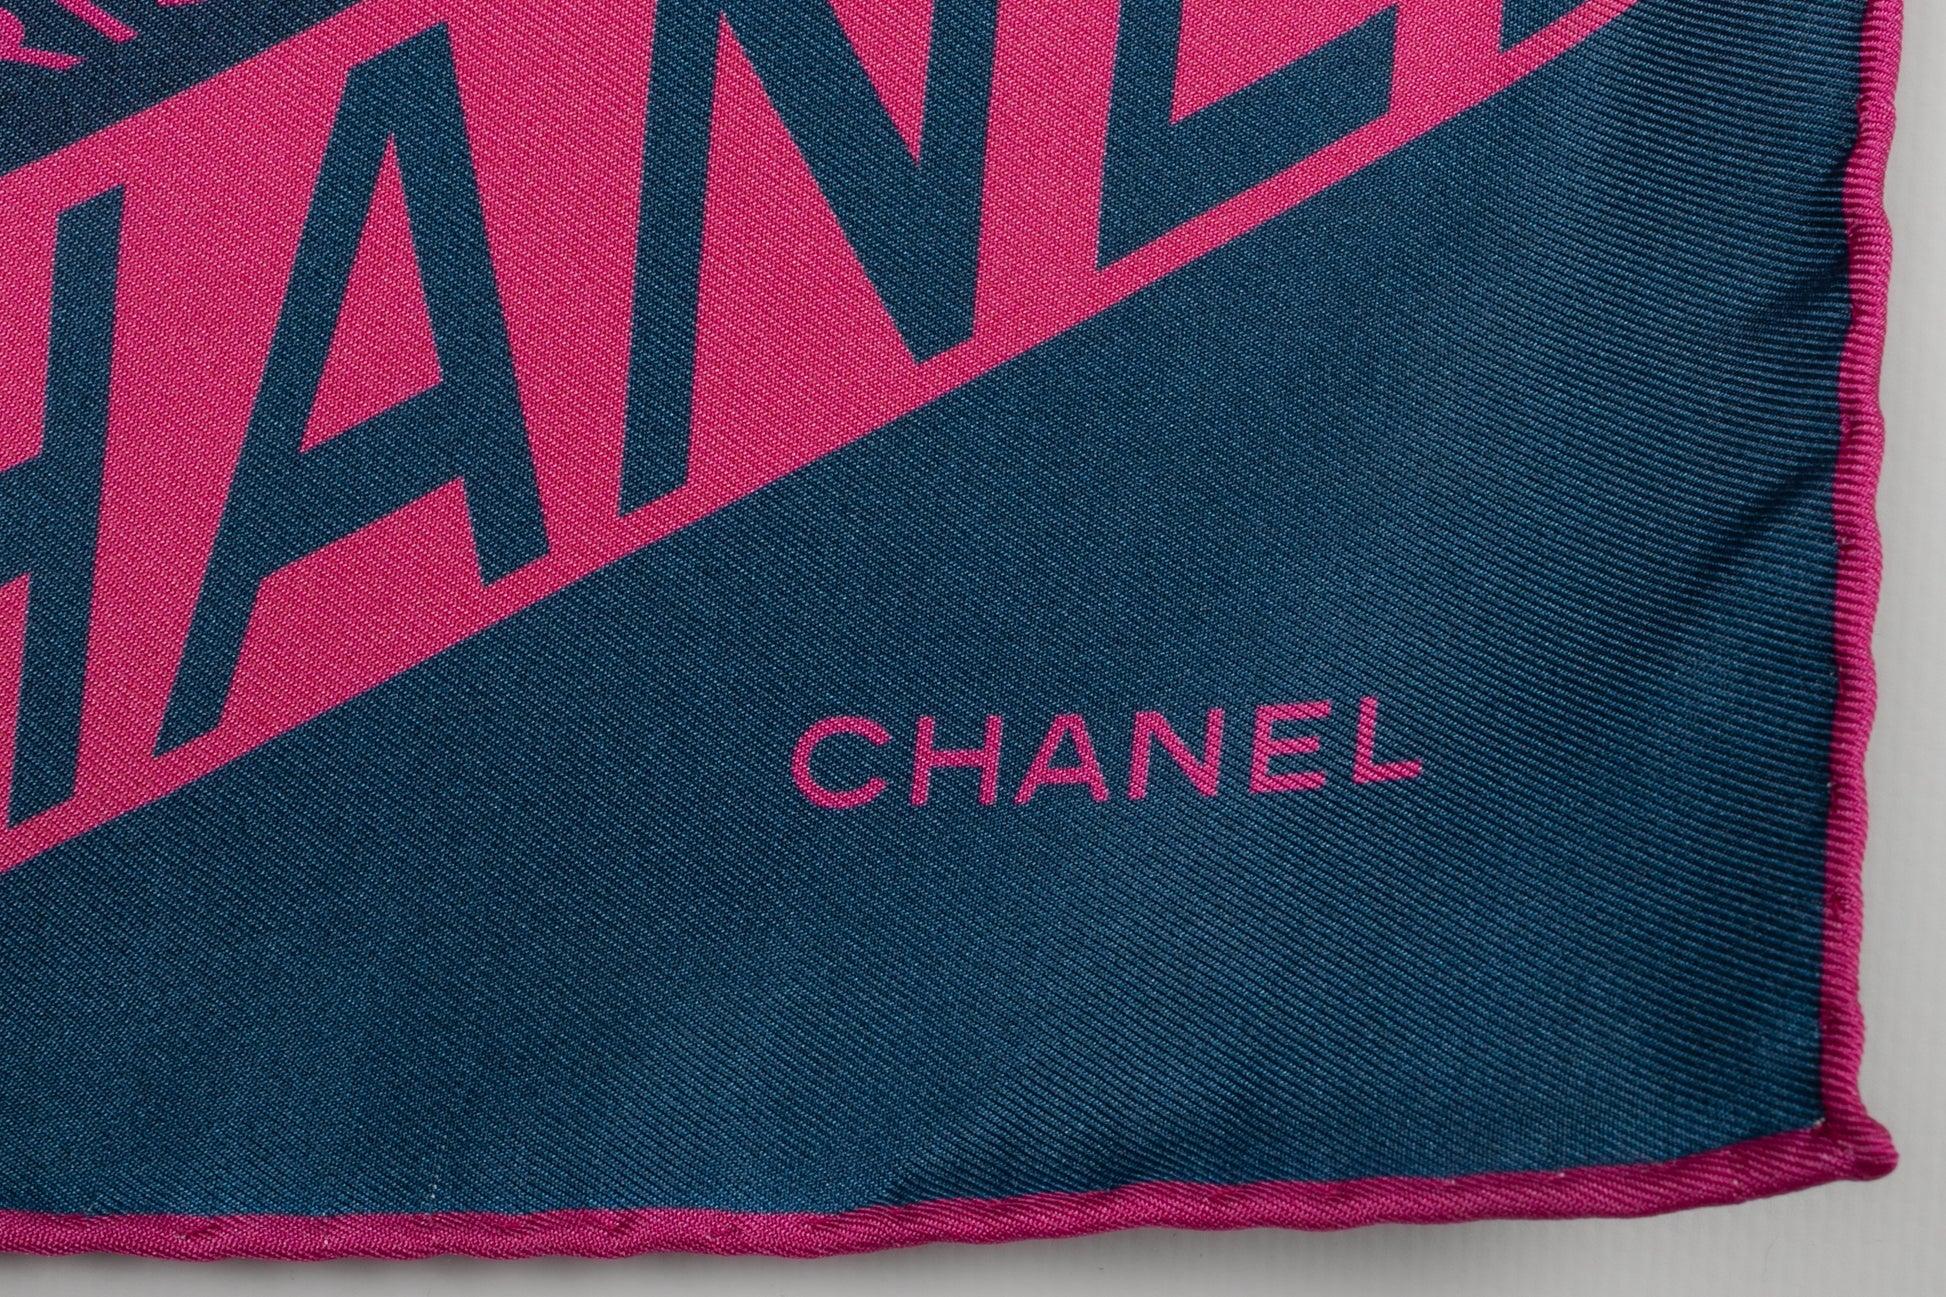 Chanel Silk Reversible Foulard in Navy Blue and Pink Tones For Sale 2